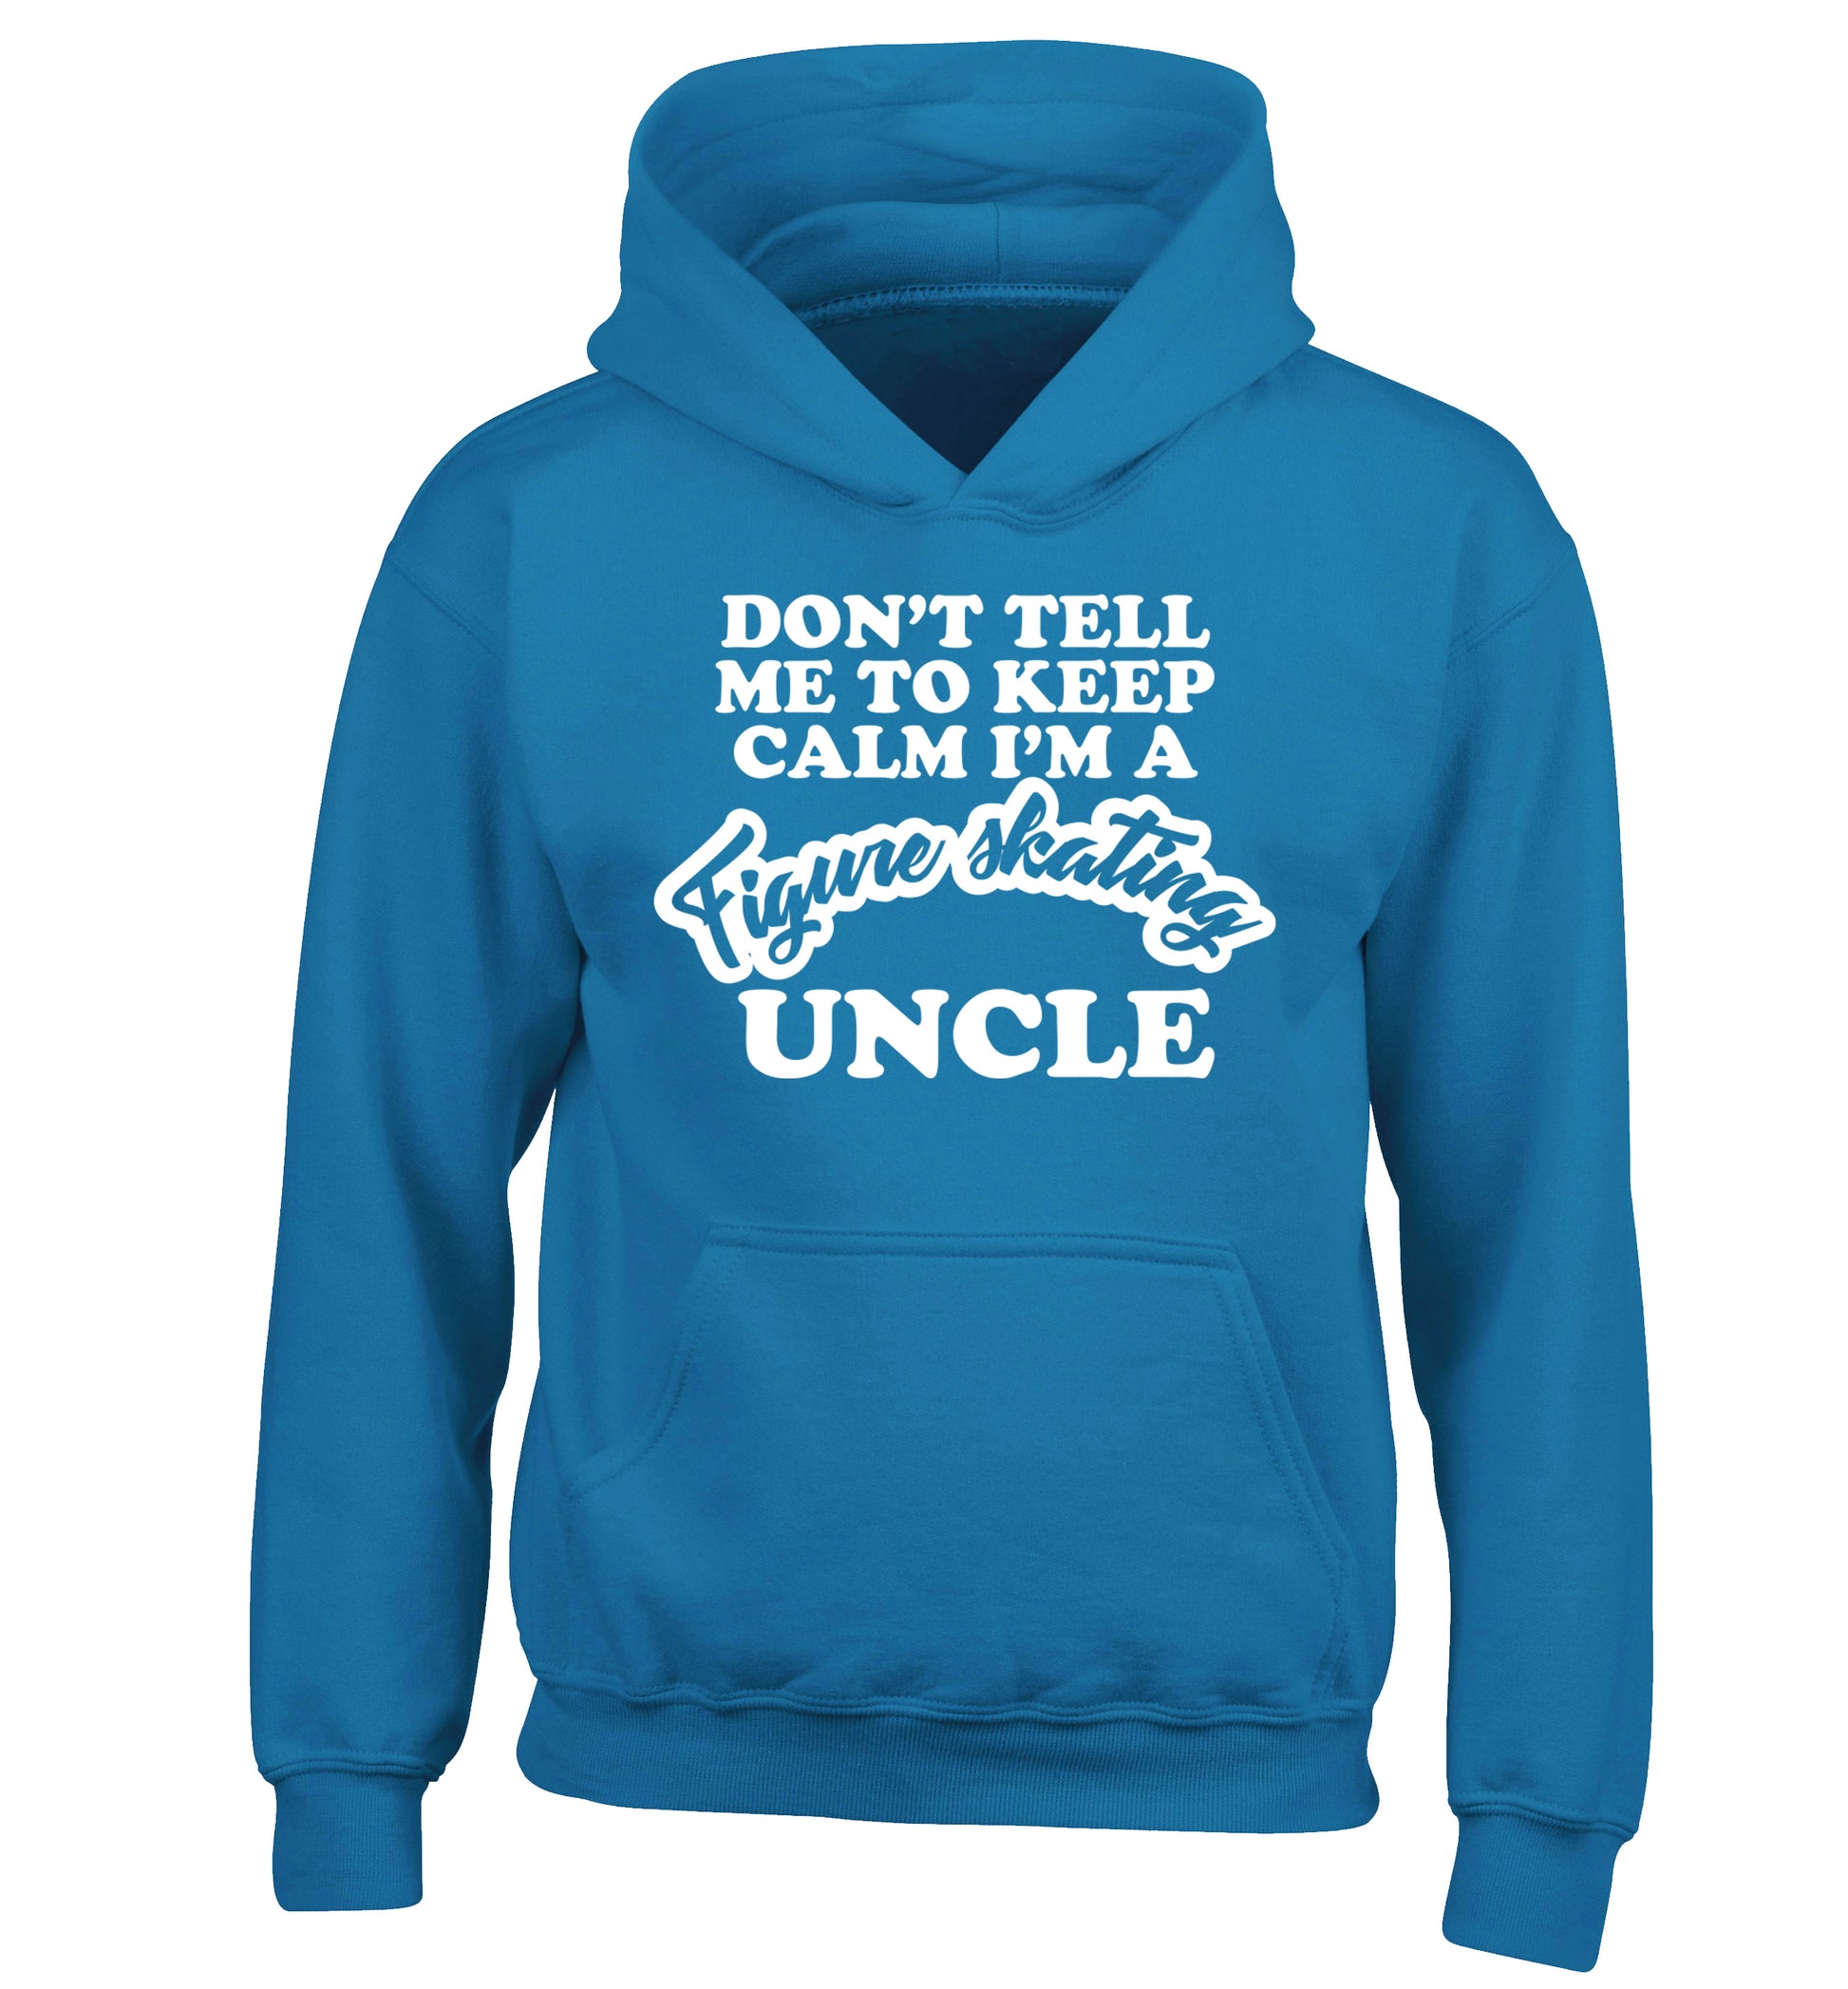 Don't tell me to keep calm I'm a figure skating uncle children's blue hoodie 12-14 Years